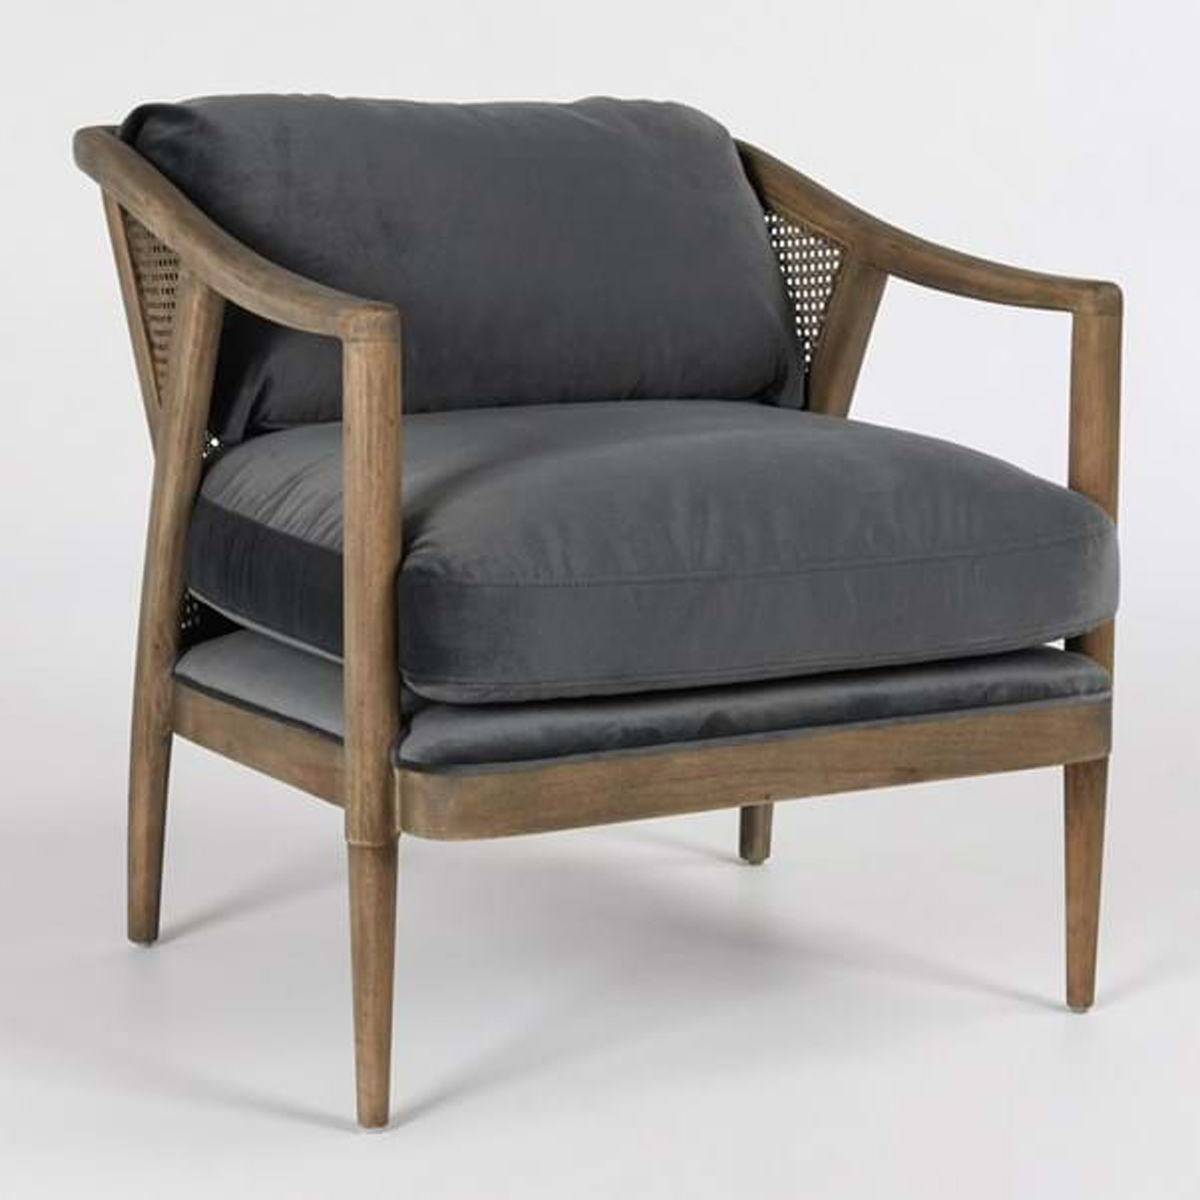 Picture of CODY ACCENT CHAIR IN STORM